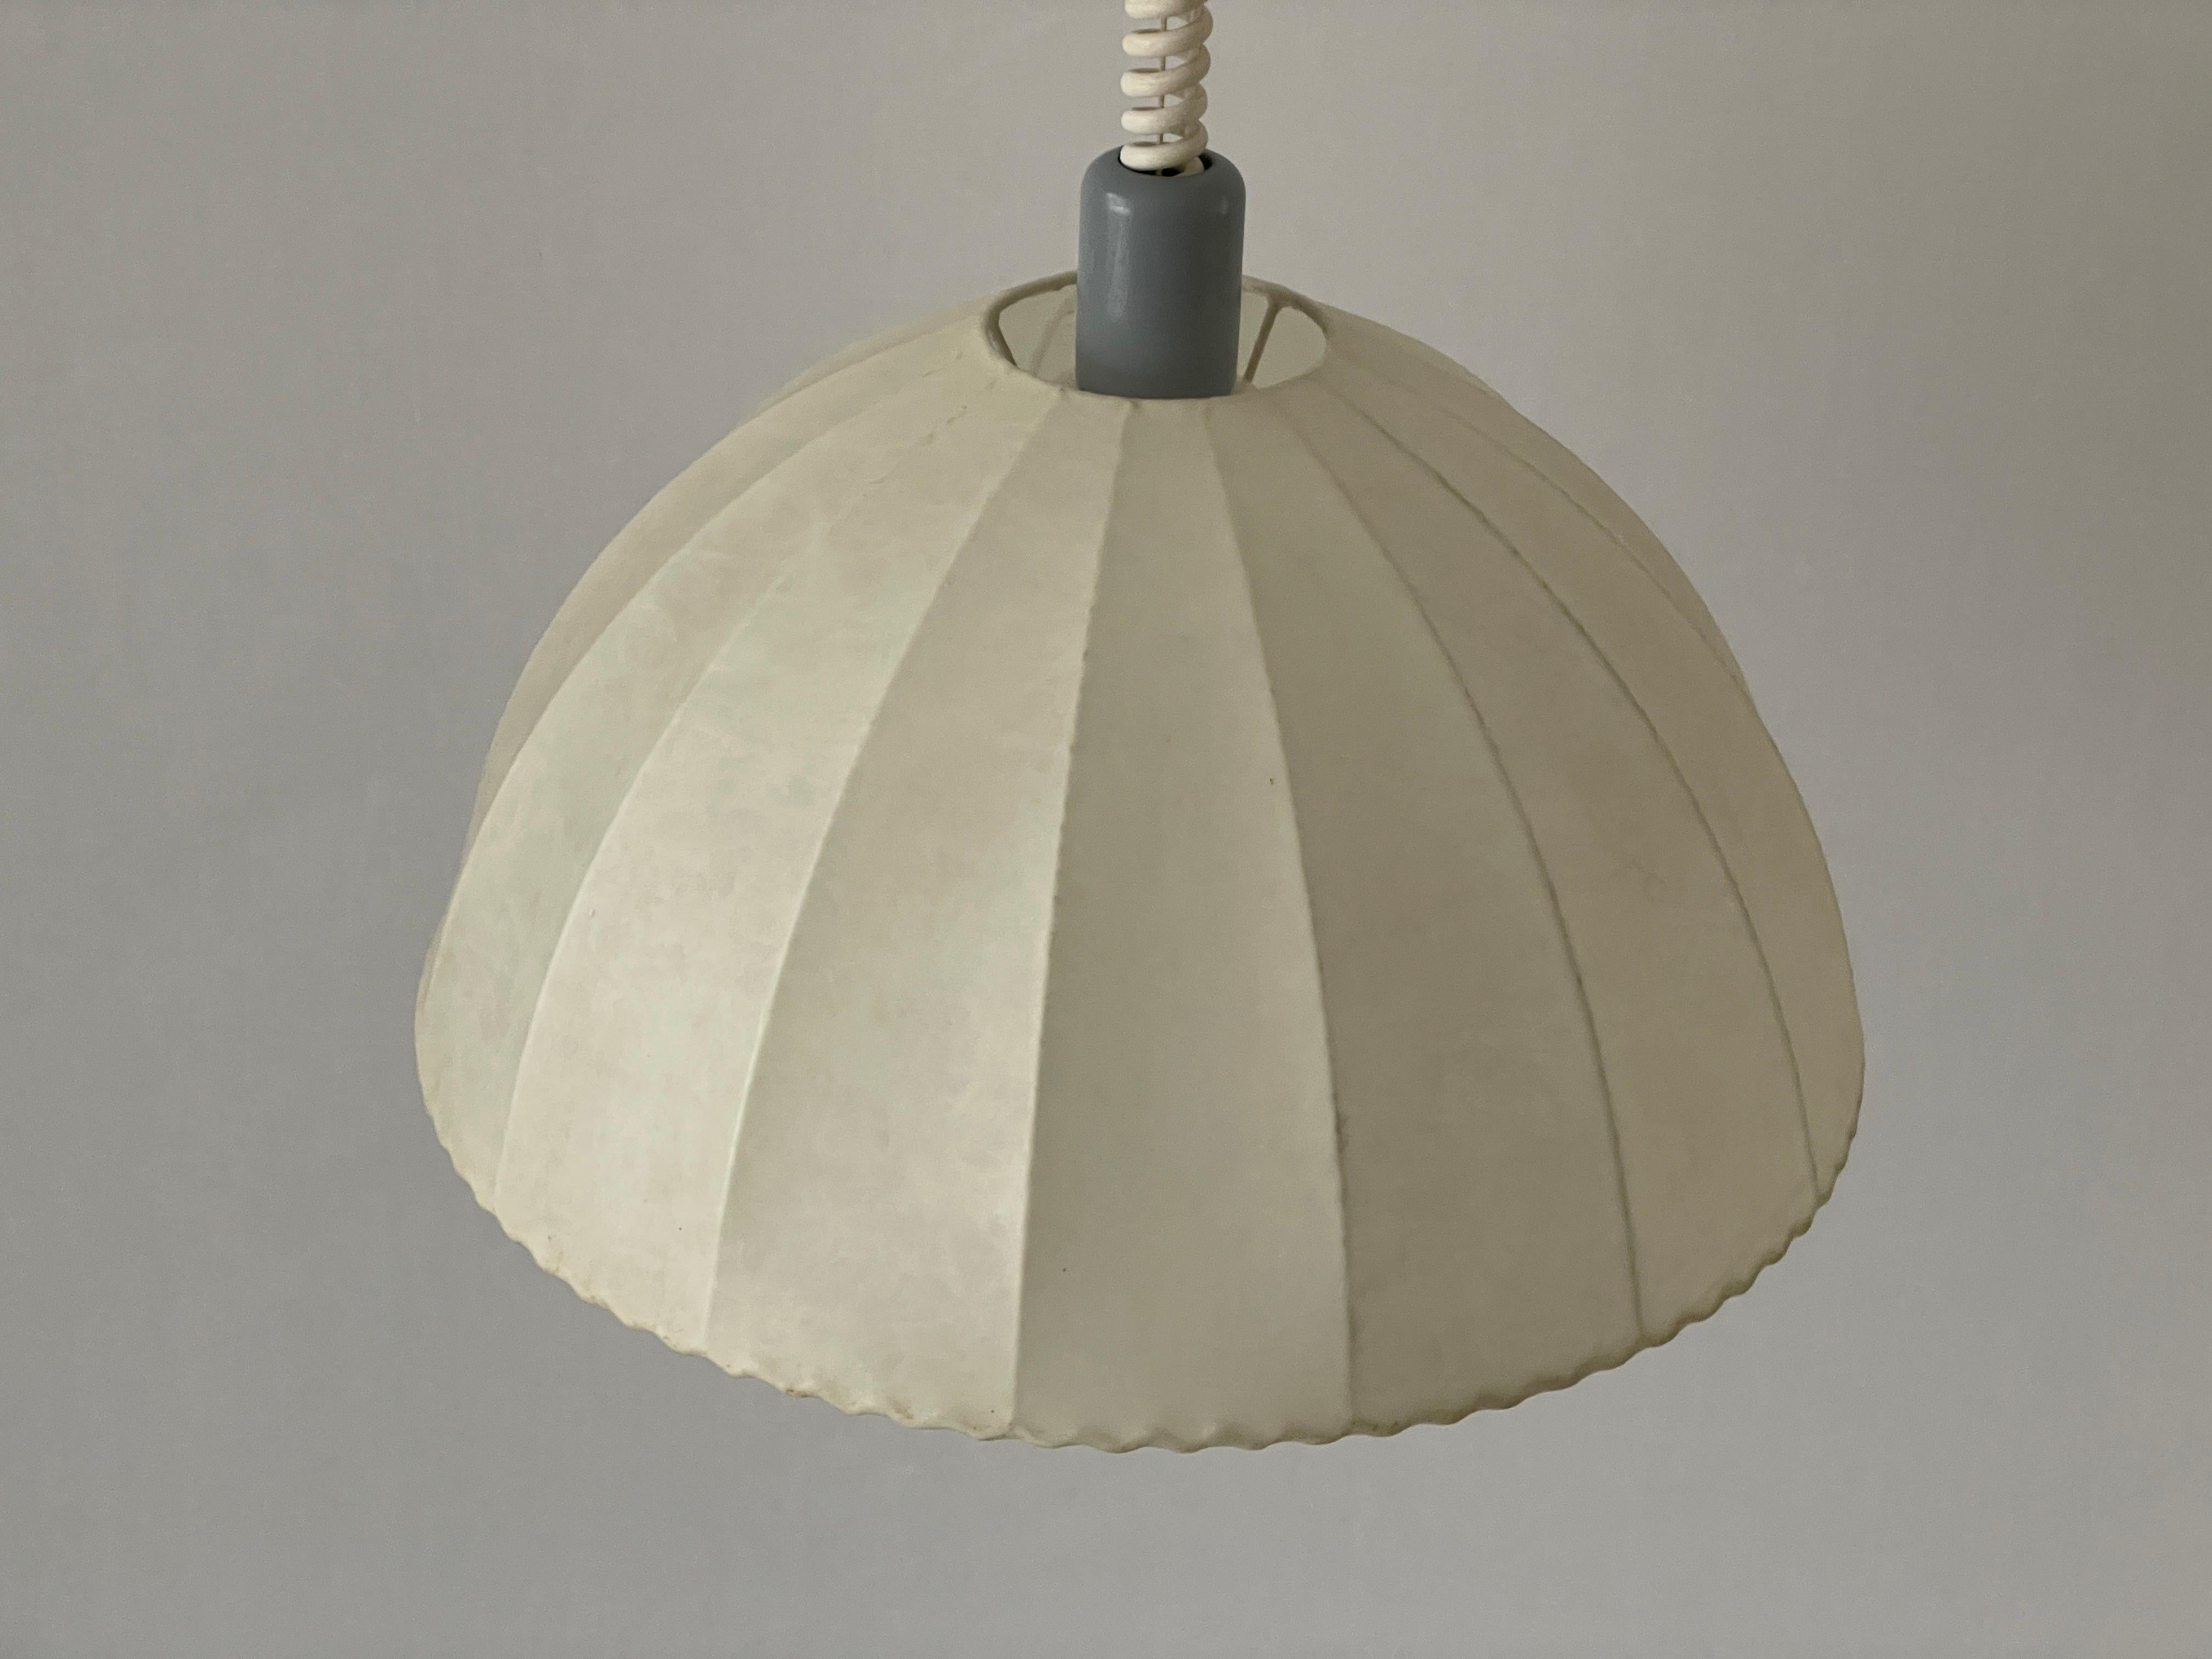 Mid-Century Modern Cocoon Pendant Lamp by Goldkant with Grey Metal Top, 1960s, Germany For Sale